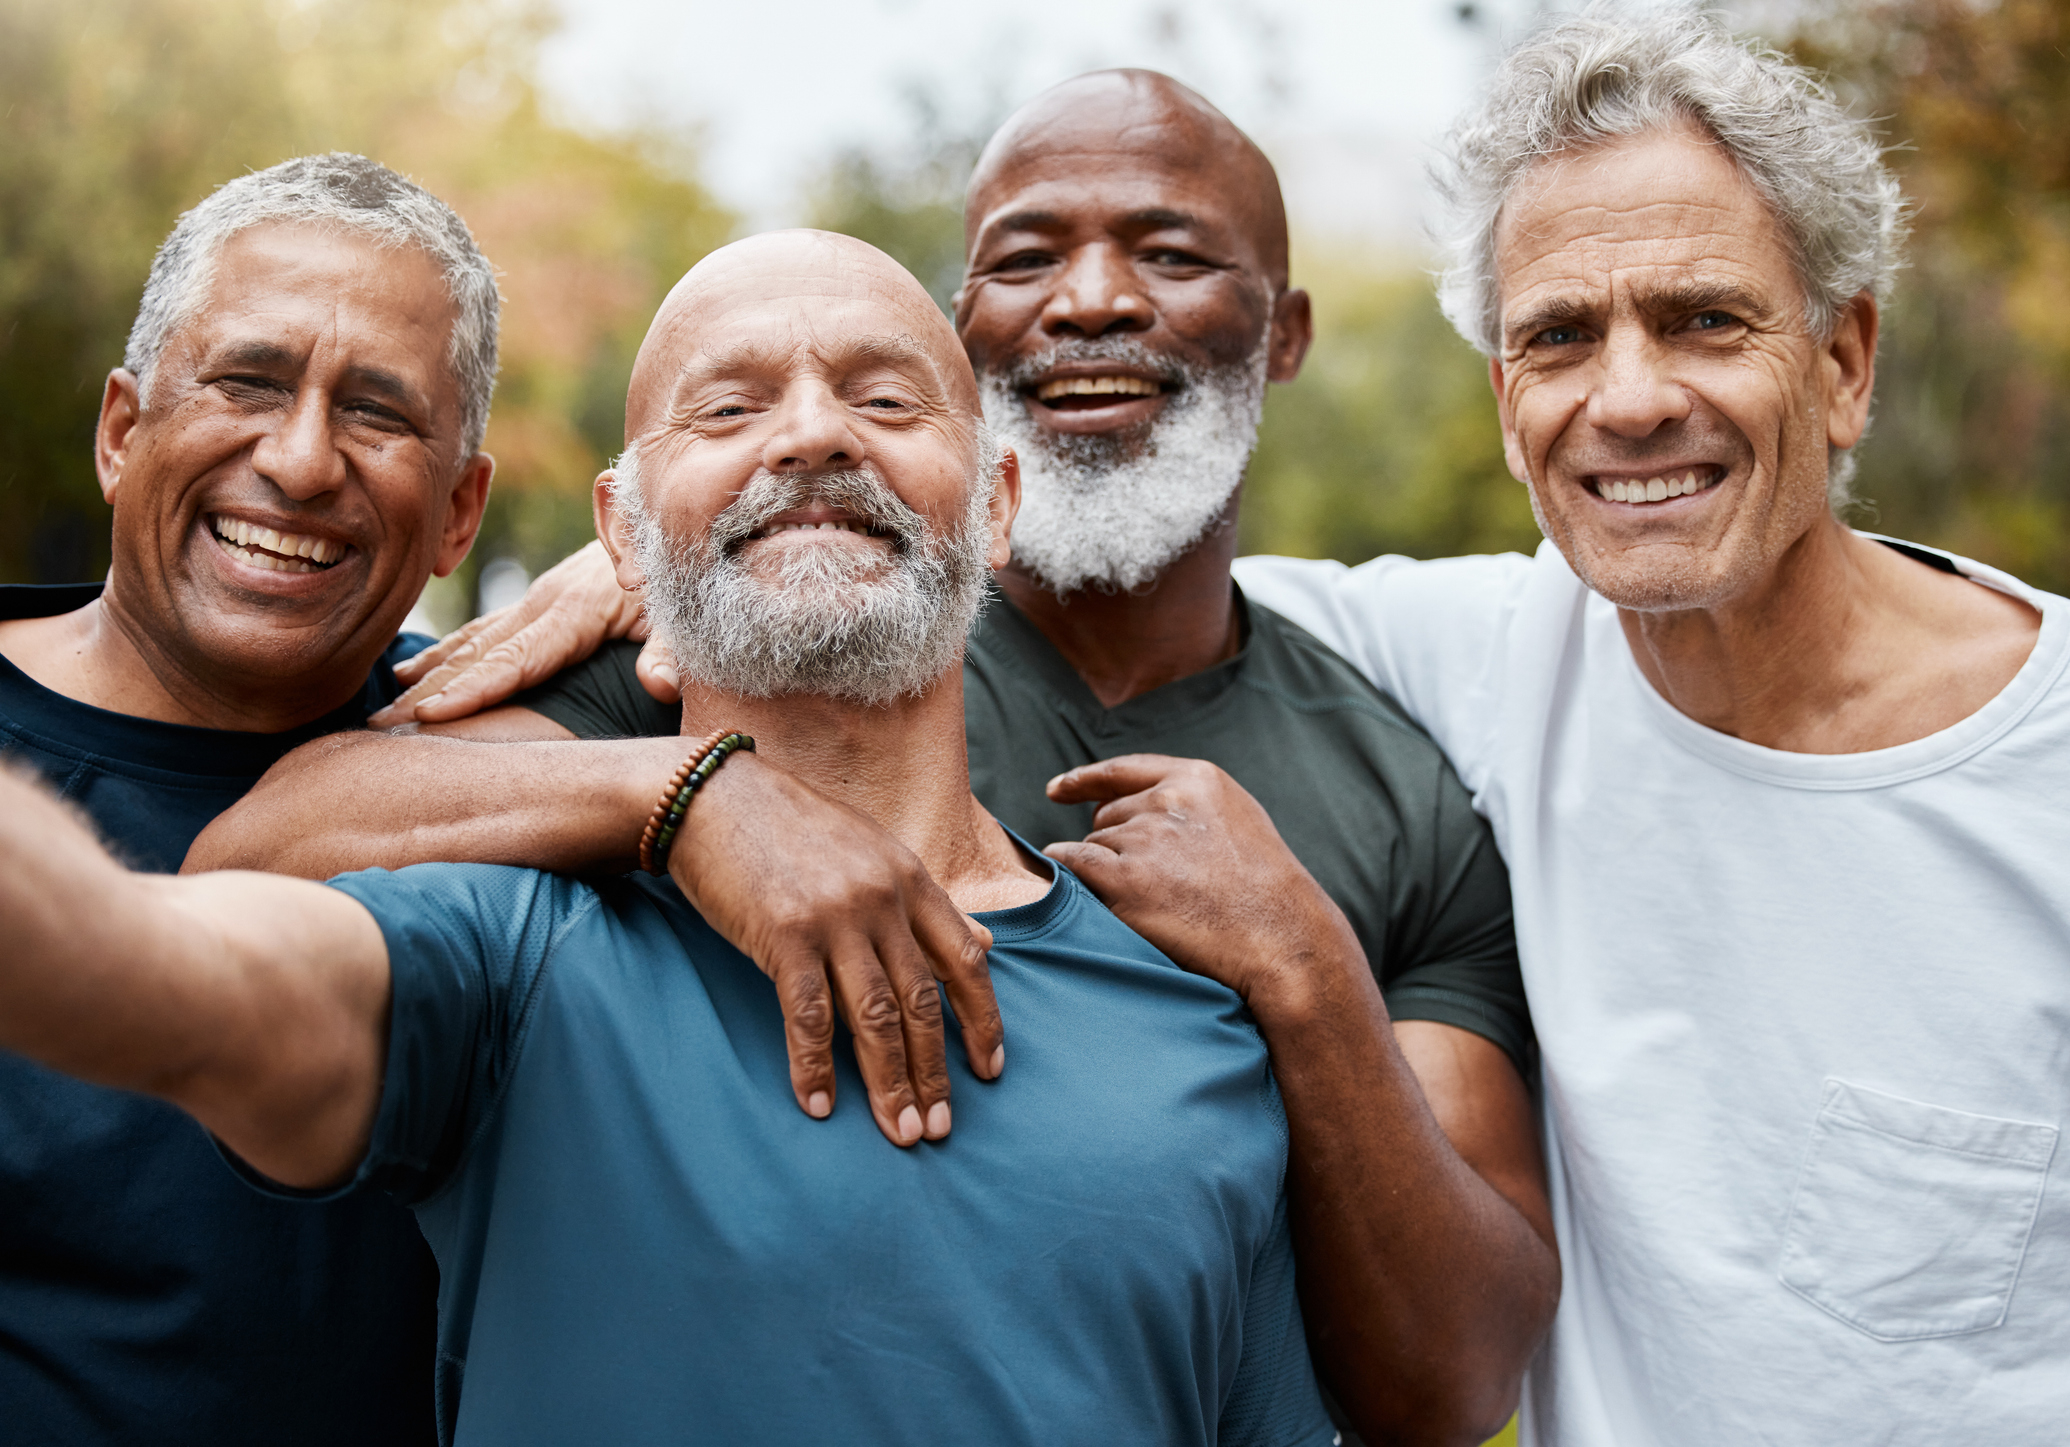 Four smiling elderly men embracing each other, portraying close friendship or relationships